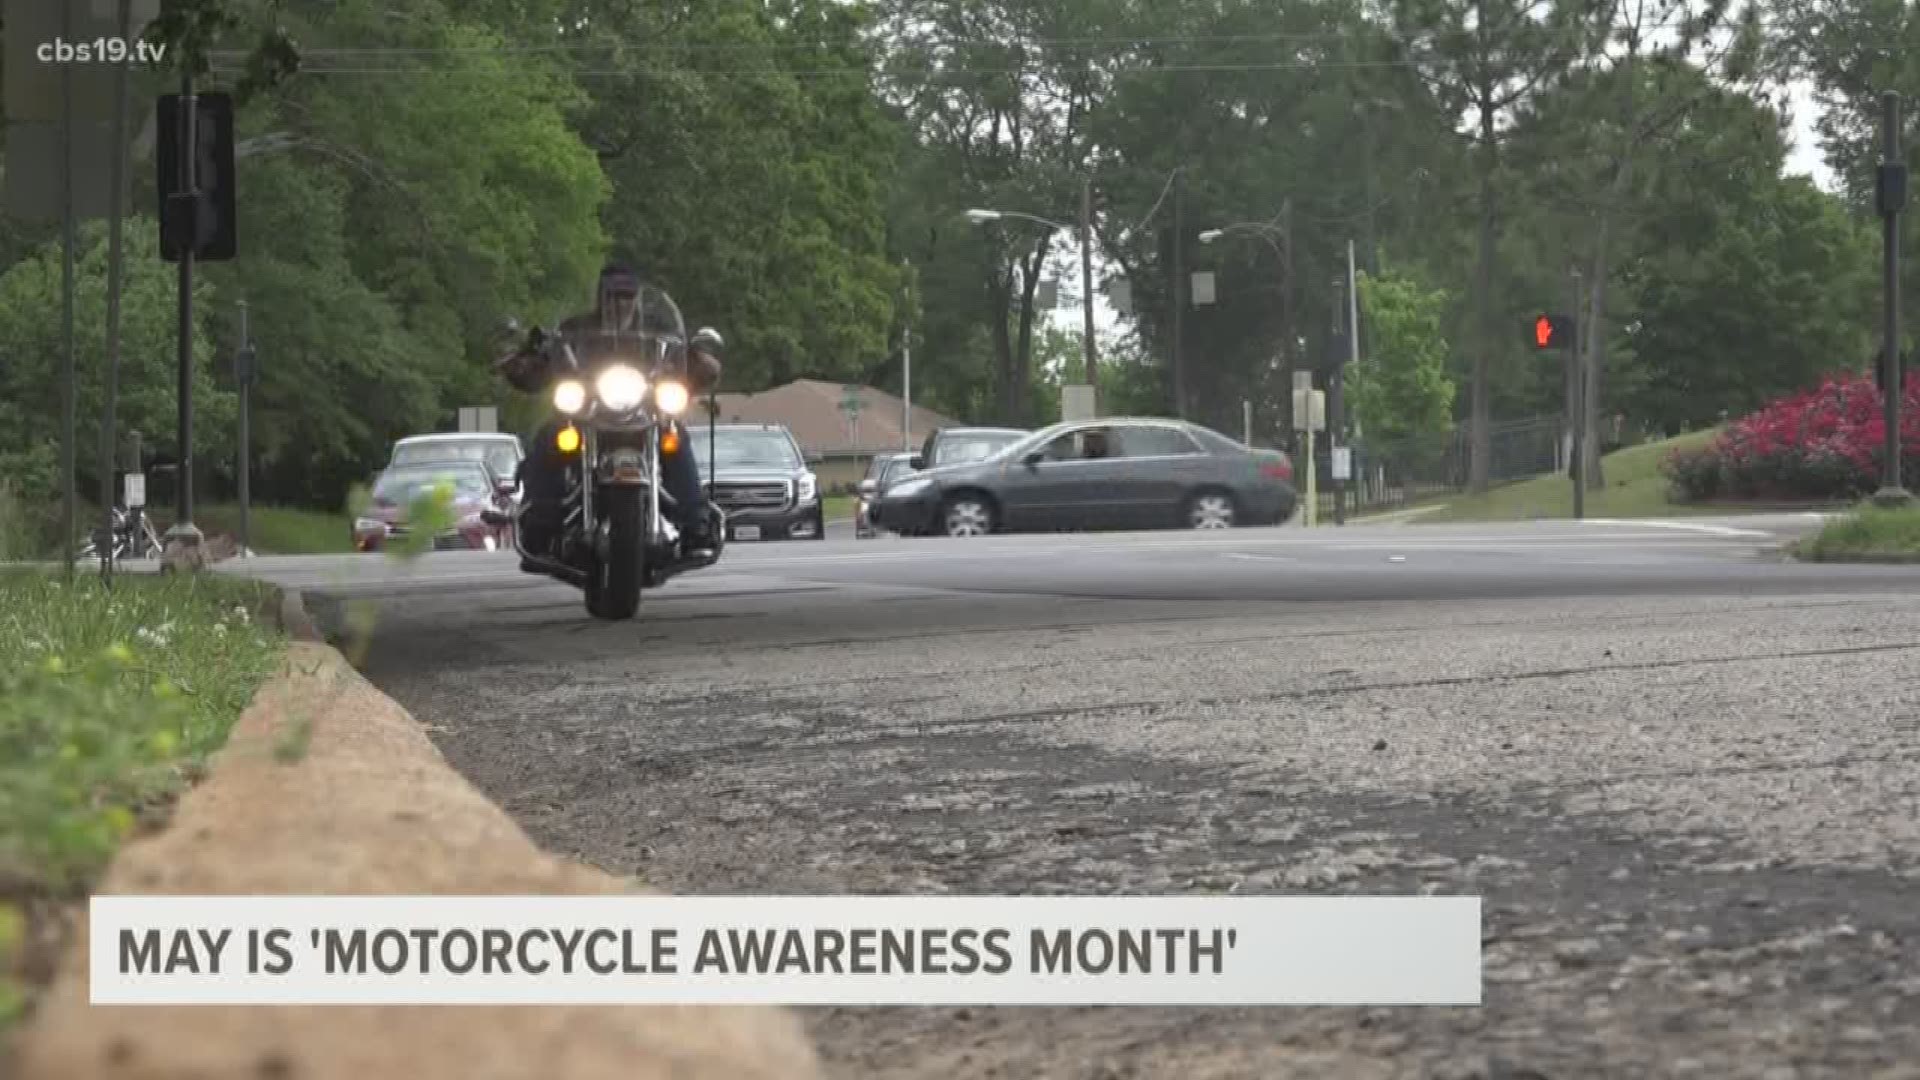 While there are several causes for motorcycle accidents, a Tyler police officer says it usually is due to drivers not seeing the motorcycle.